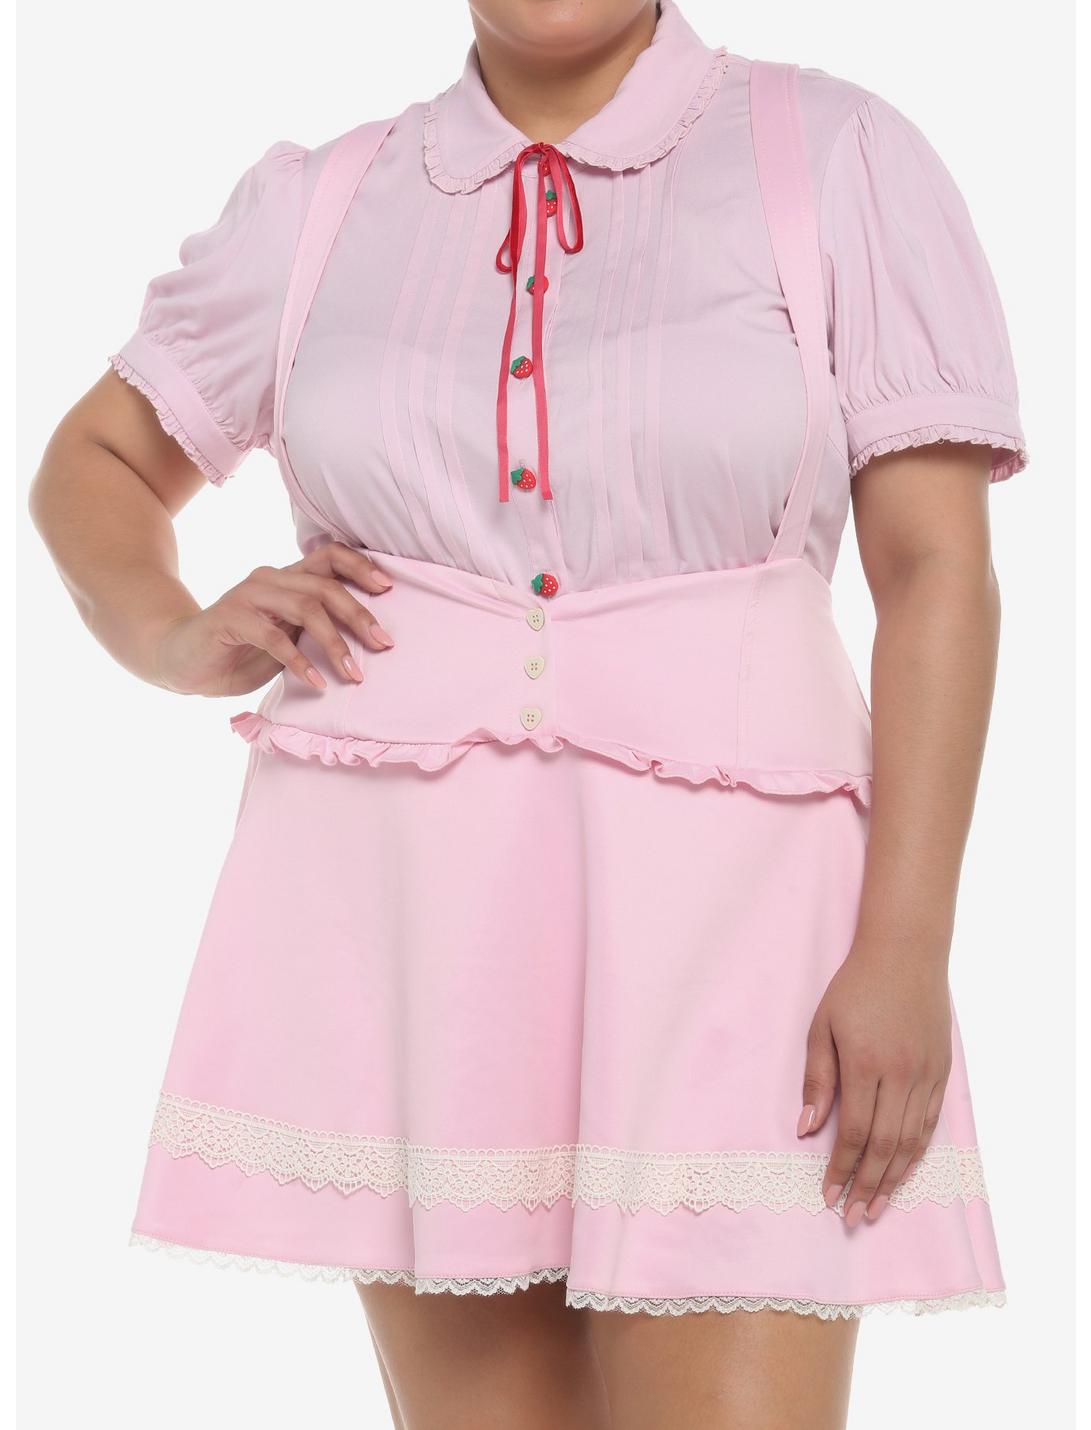 Pink Hearts & Lace Suspender Skirt Plus Size, PINK, hi-res